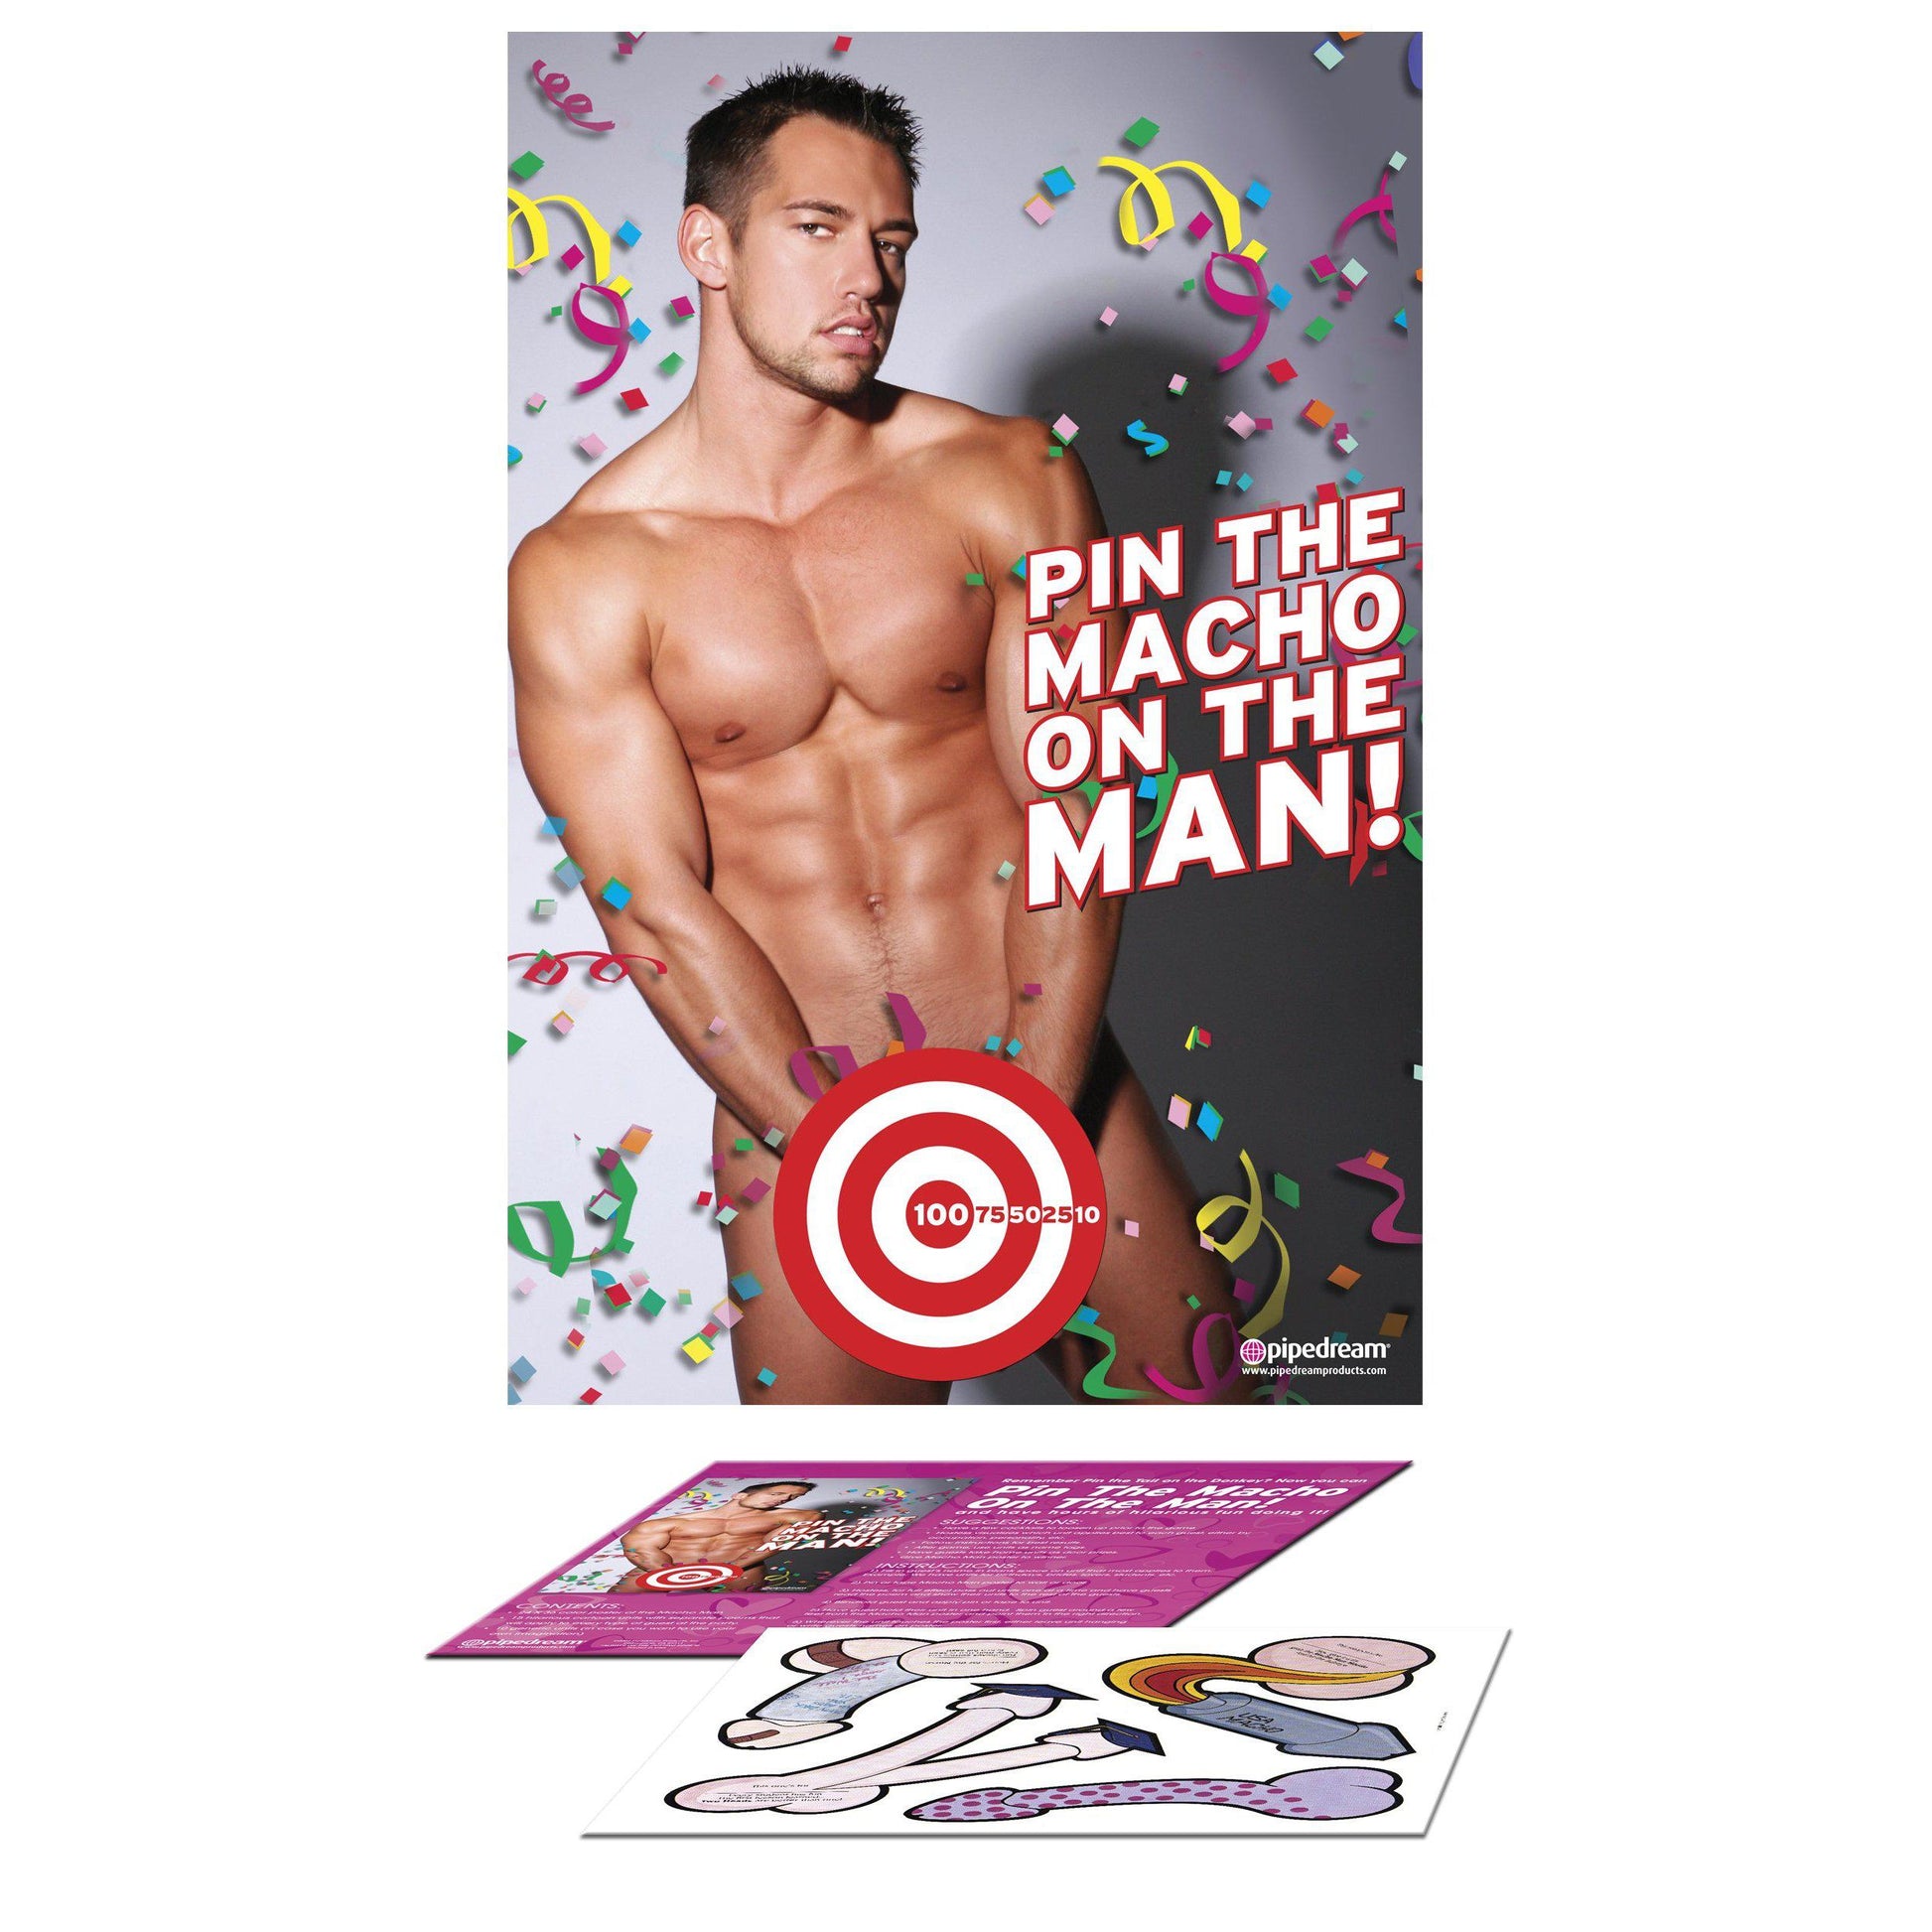 Bachelorette Party Favors - Pin the Macho on the Man